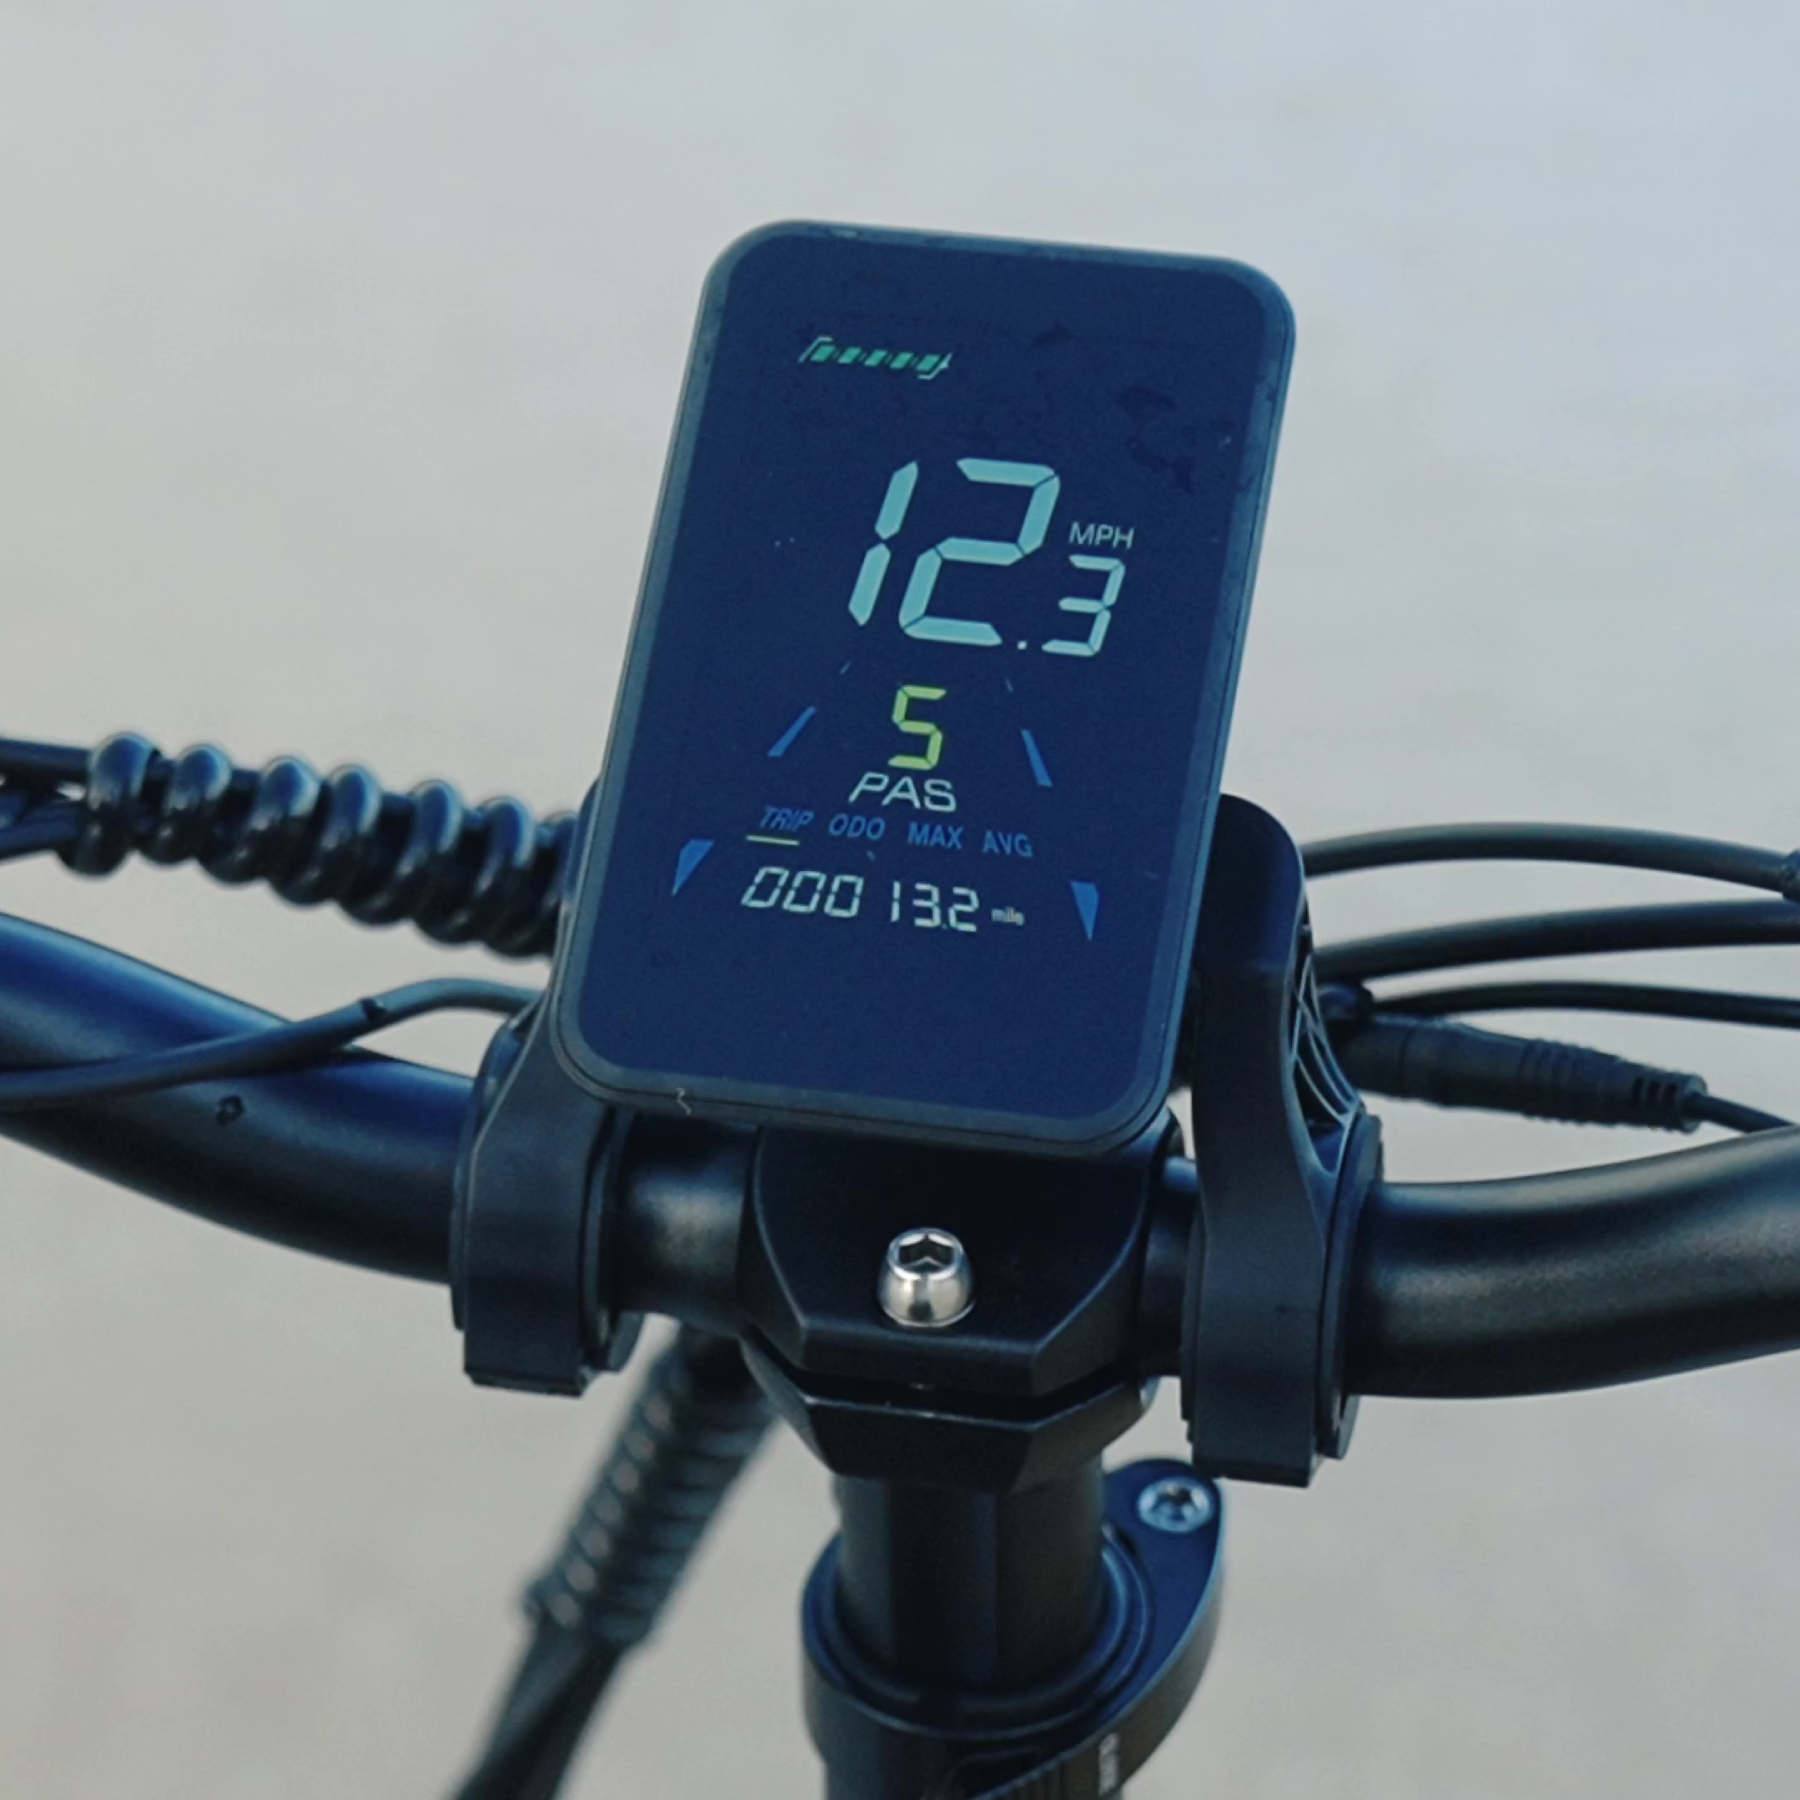 Romatlink Dolphin 750W Folding Fat Tire Ebike with a Smart LCD display